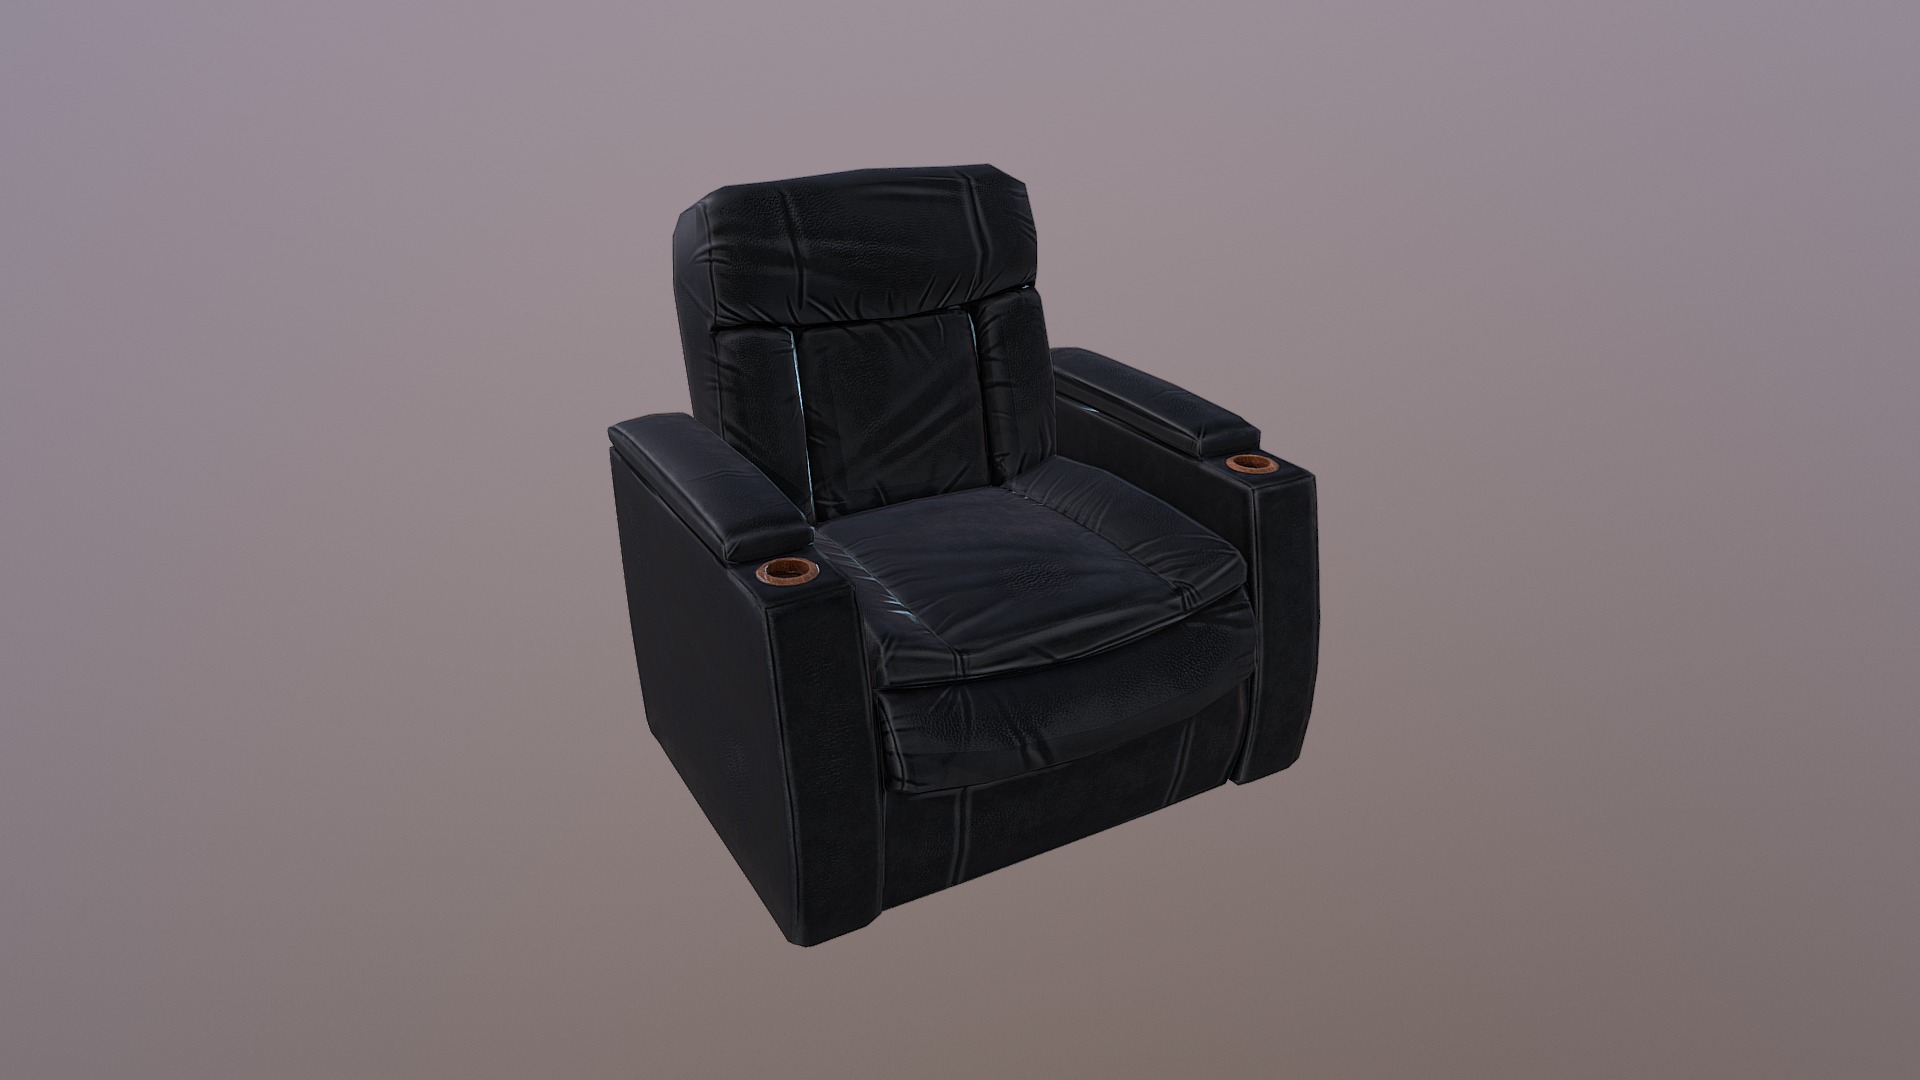 3D model Armchair Boss - This is a 3D model of the Armchair Boss. The 3D model is about a black leather chair.